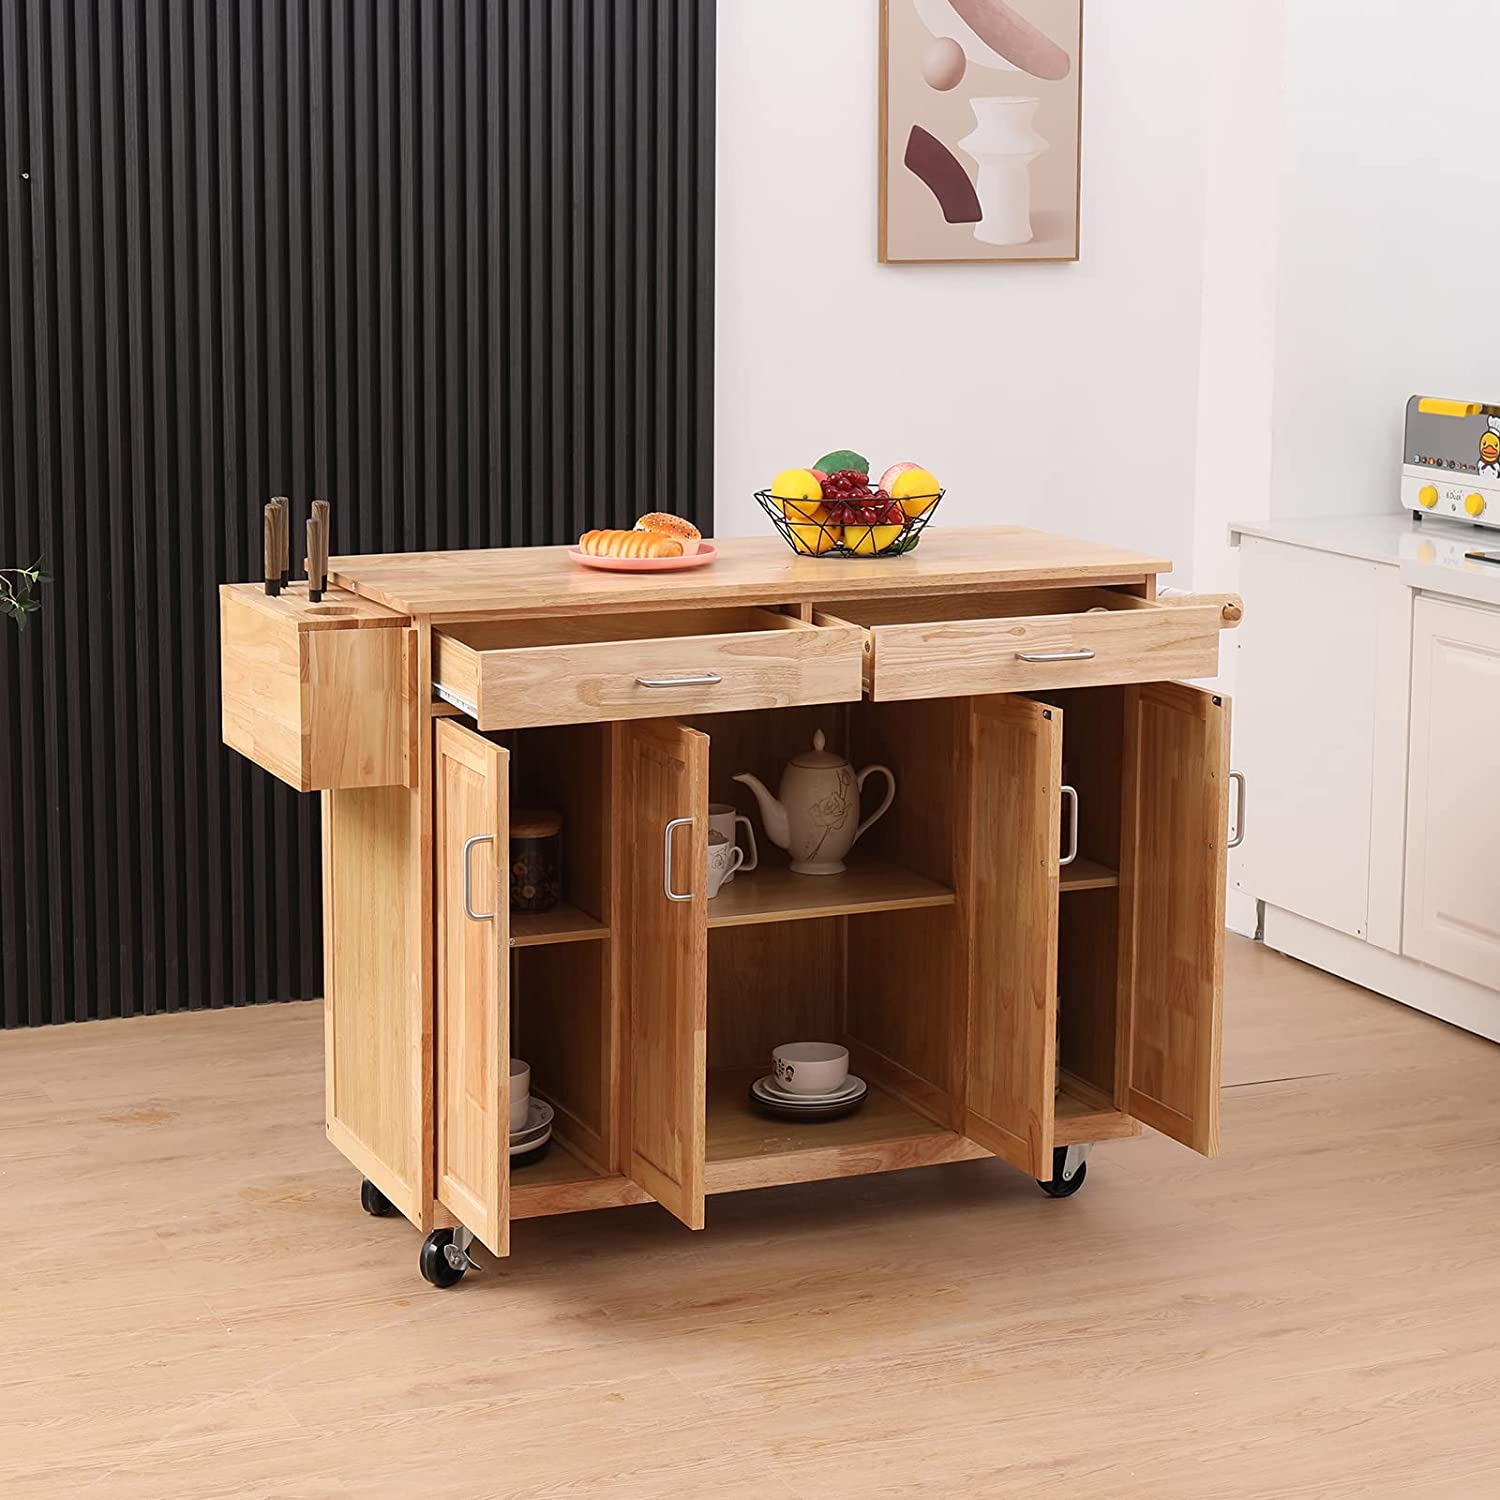 Yoleny Wooden Sideboard Buffet Cabinet with Wheels， Rolling Kitchen Cart with Drawers 54